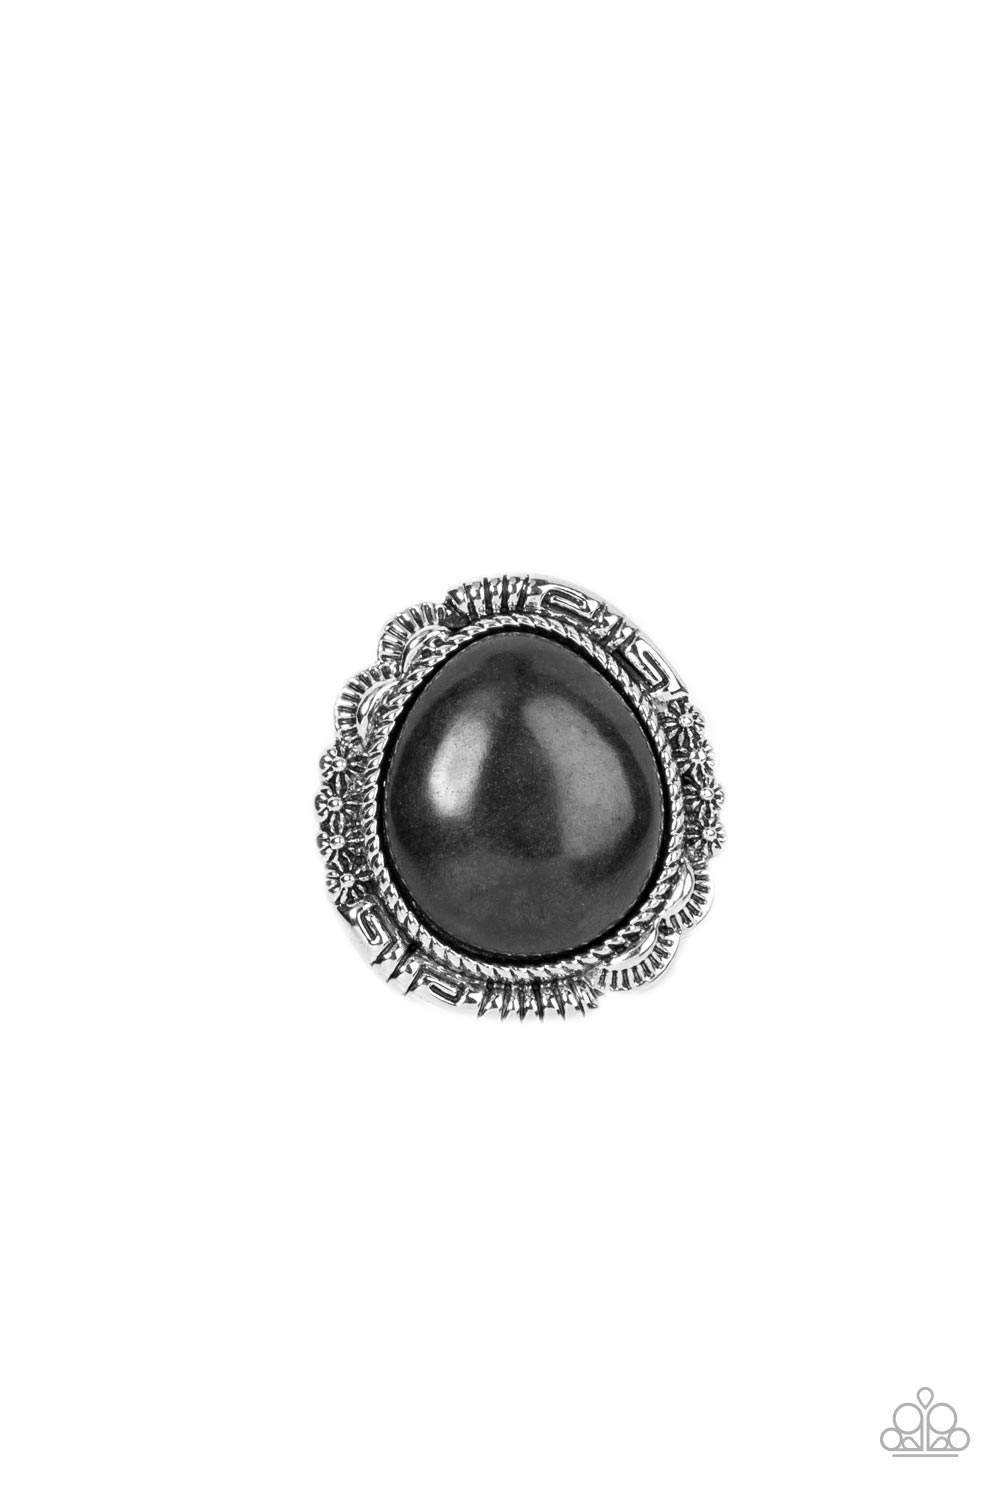 Salt of the Earth - black - Paparazzi ring